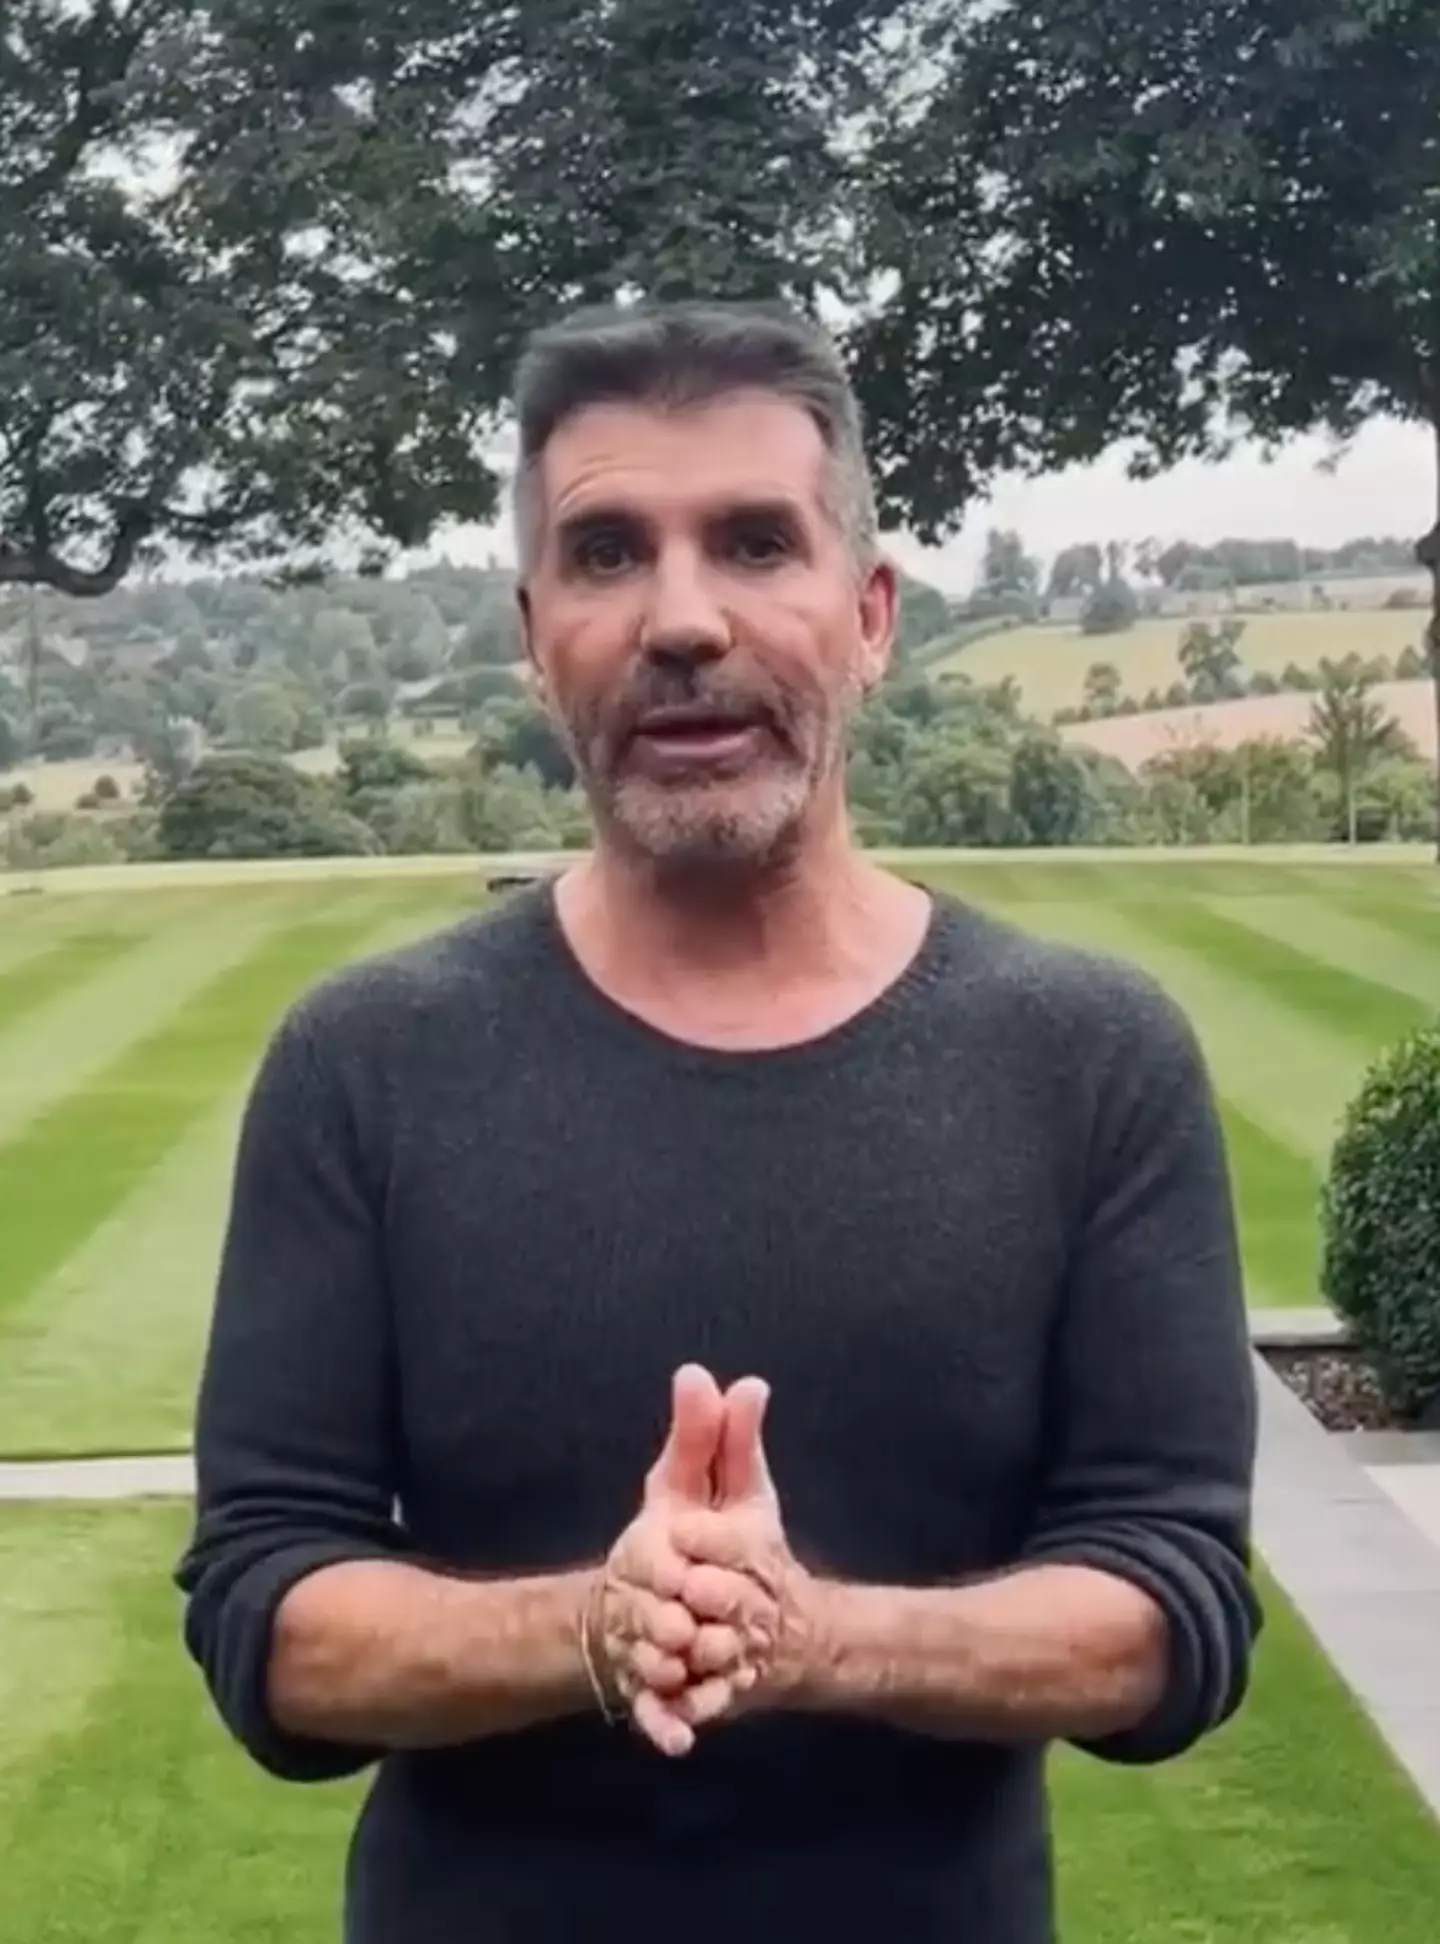 Simon Cowell took to Instagram to share an announcement to his followers.